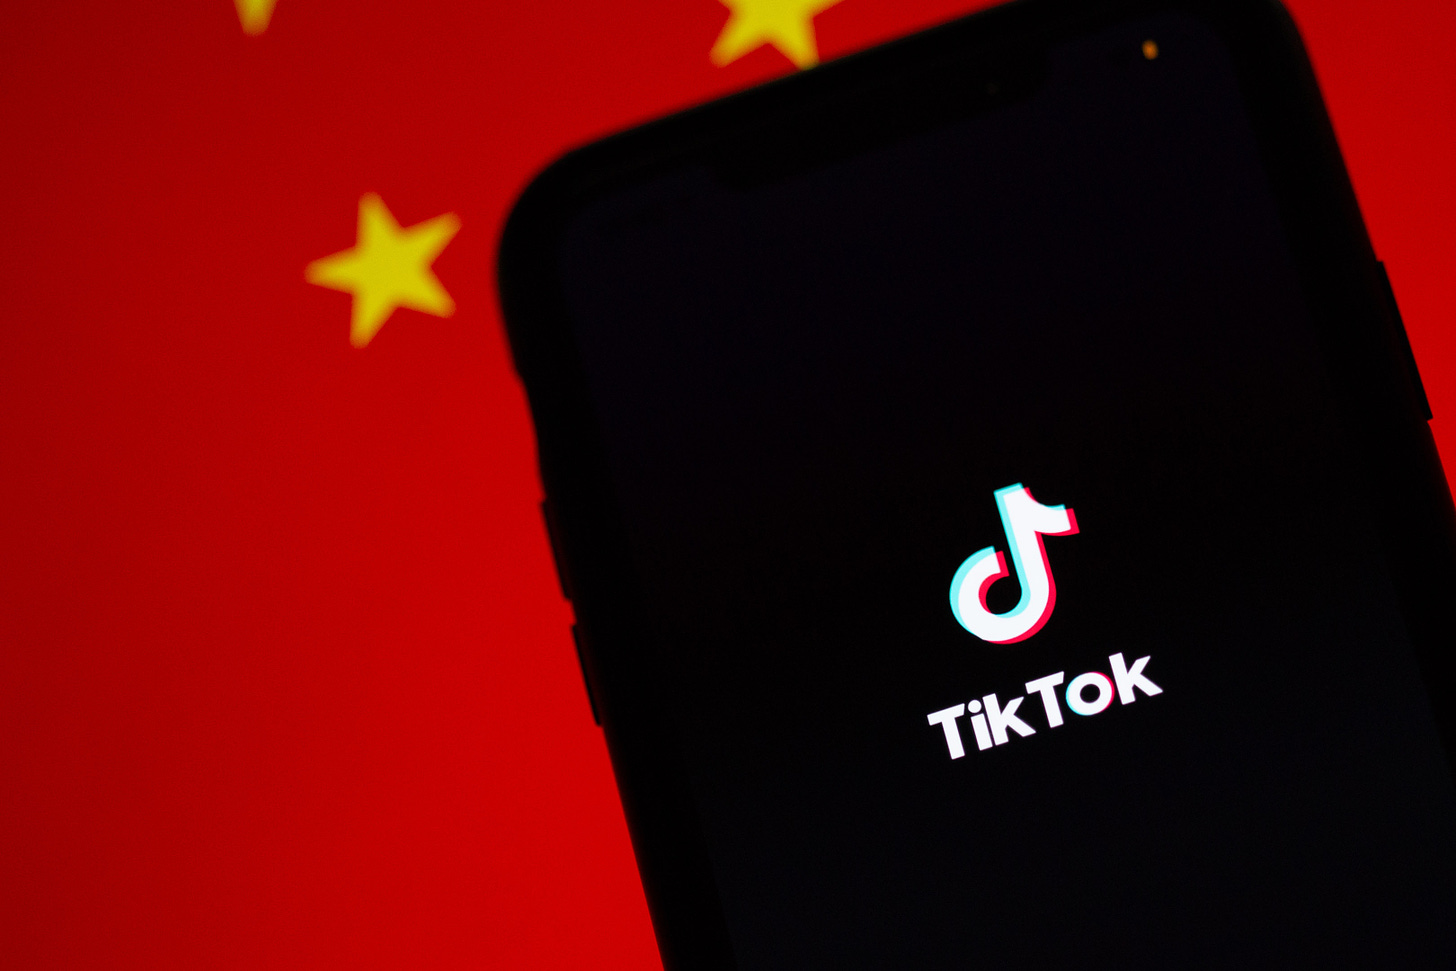 Tiktok app and the Chinese Flag